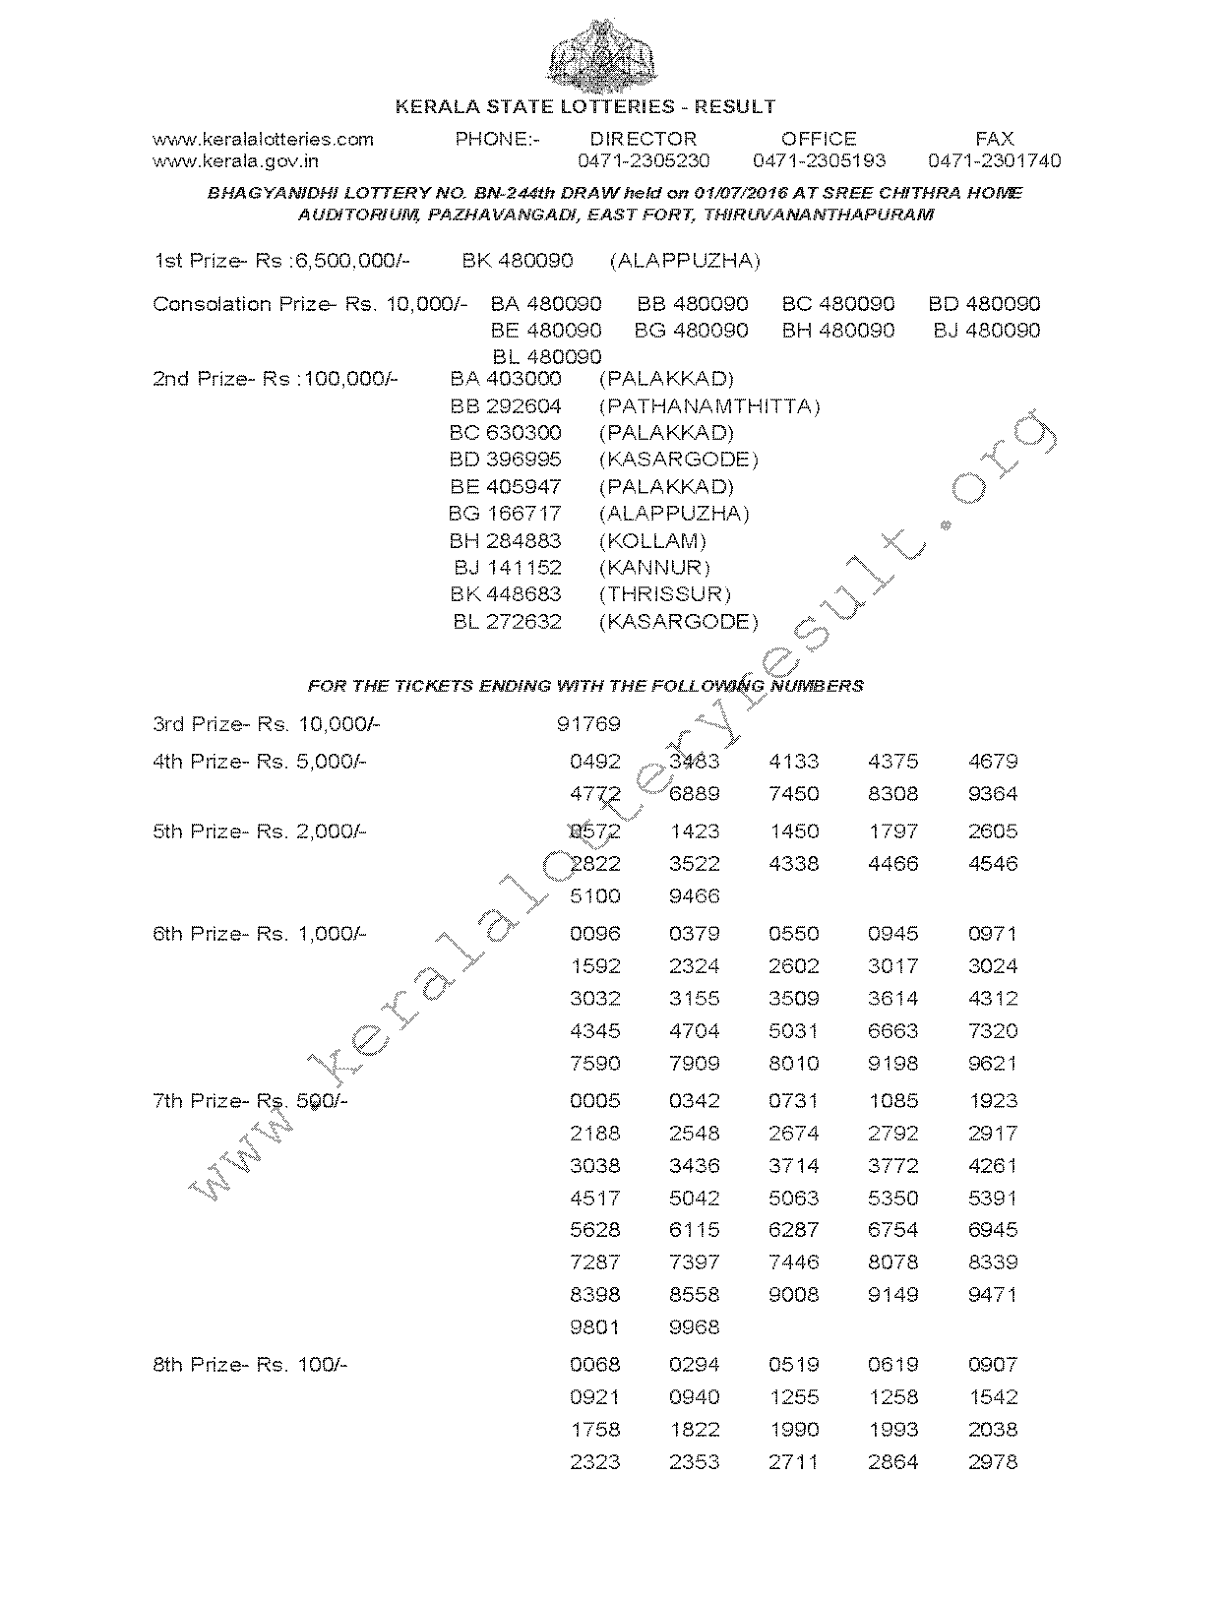 BHAGYANIDHI BN 244 Lottery Results 1-7-2016